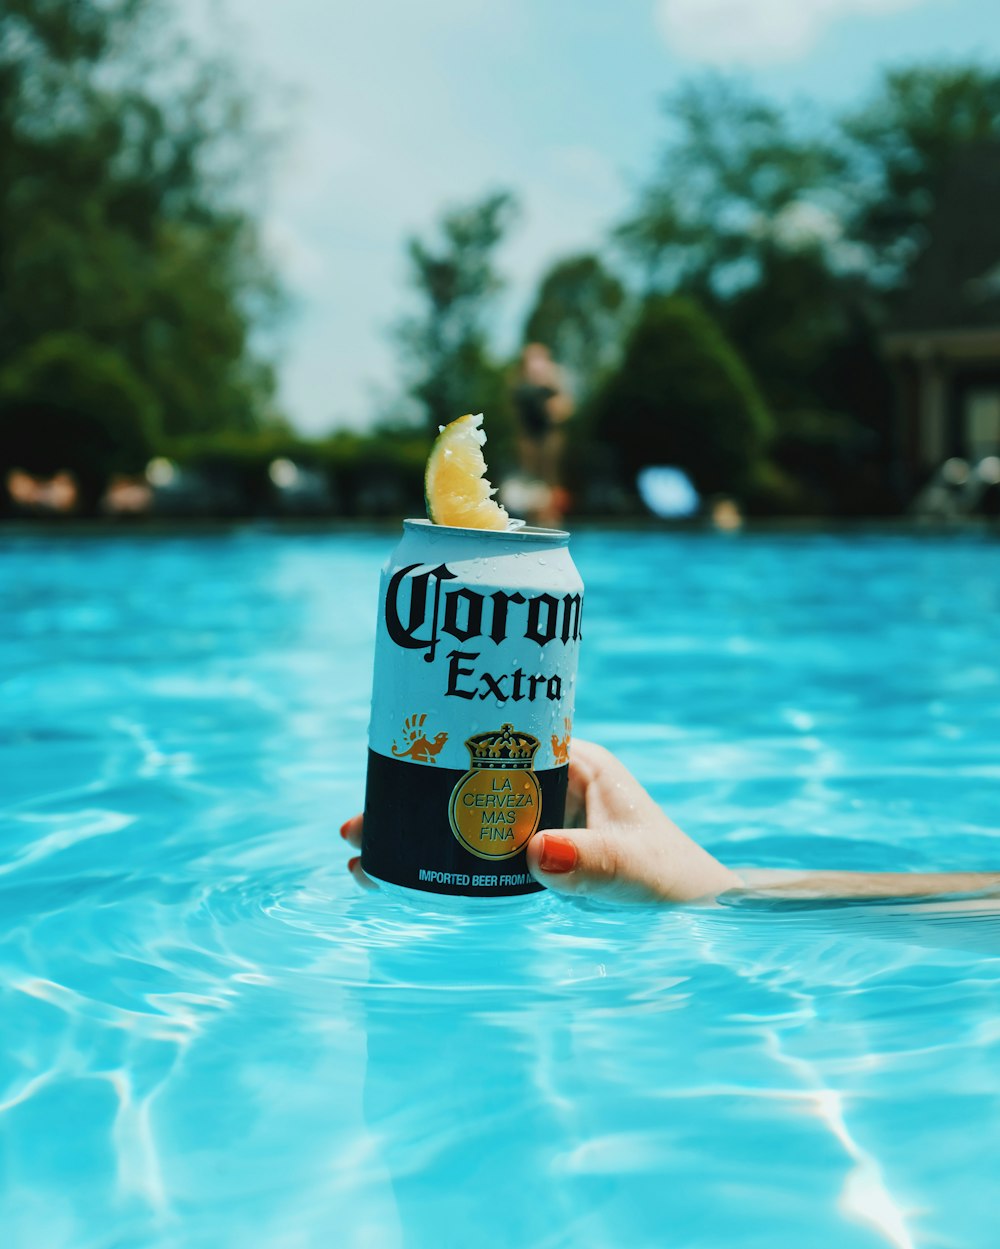 Corona extra beer can on swimming pool